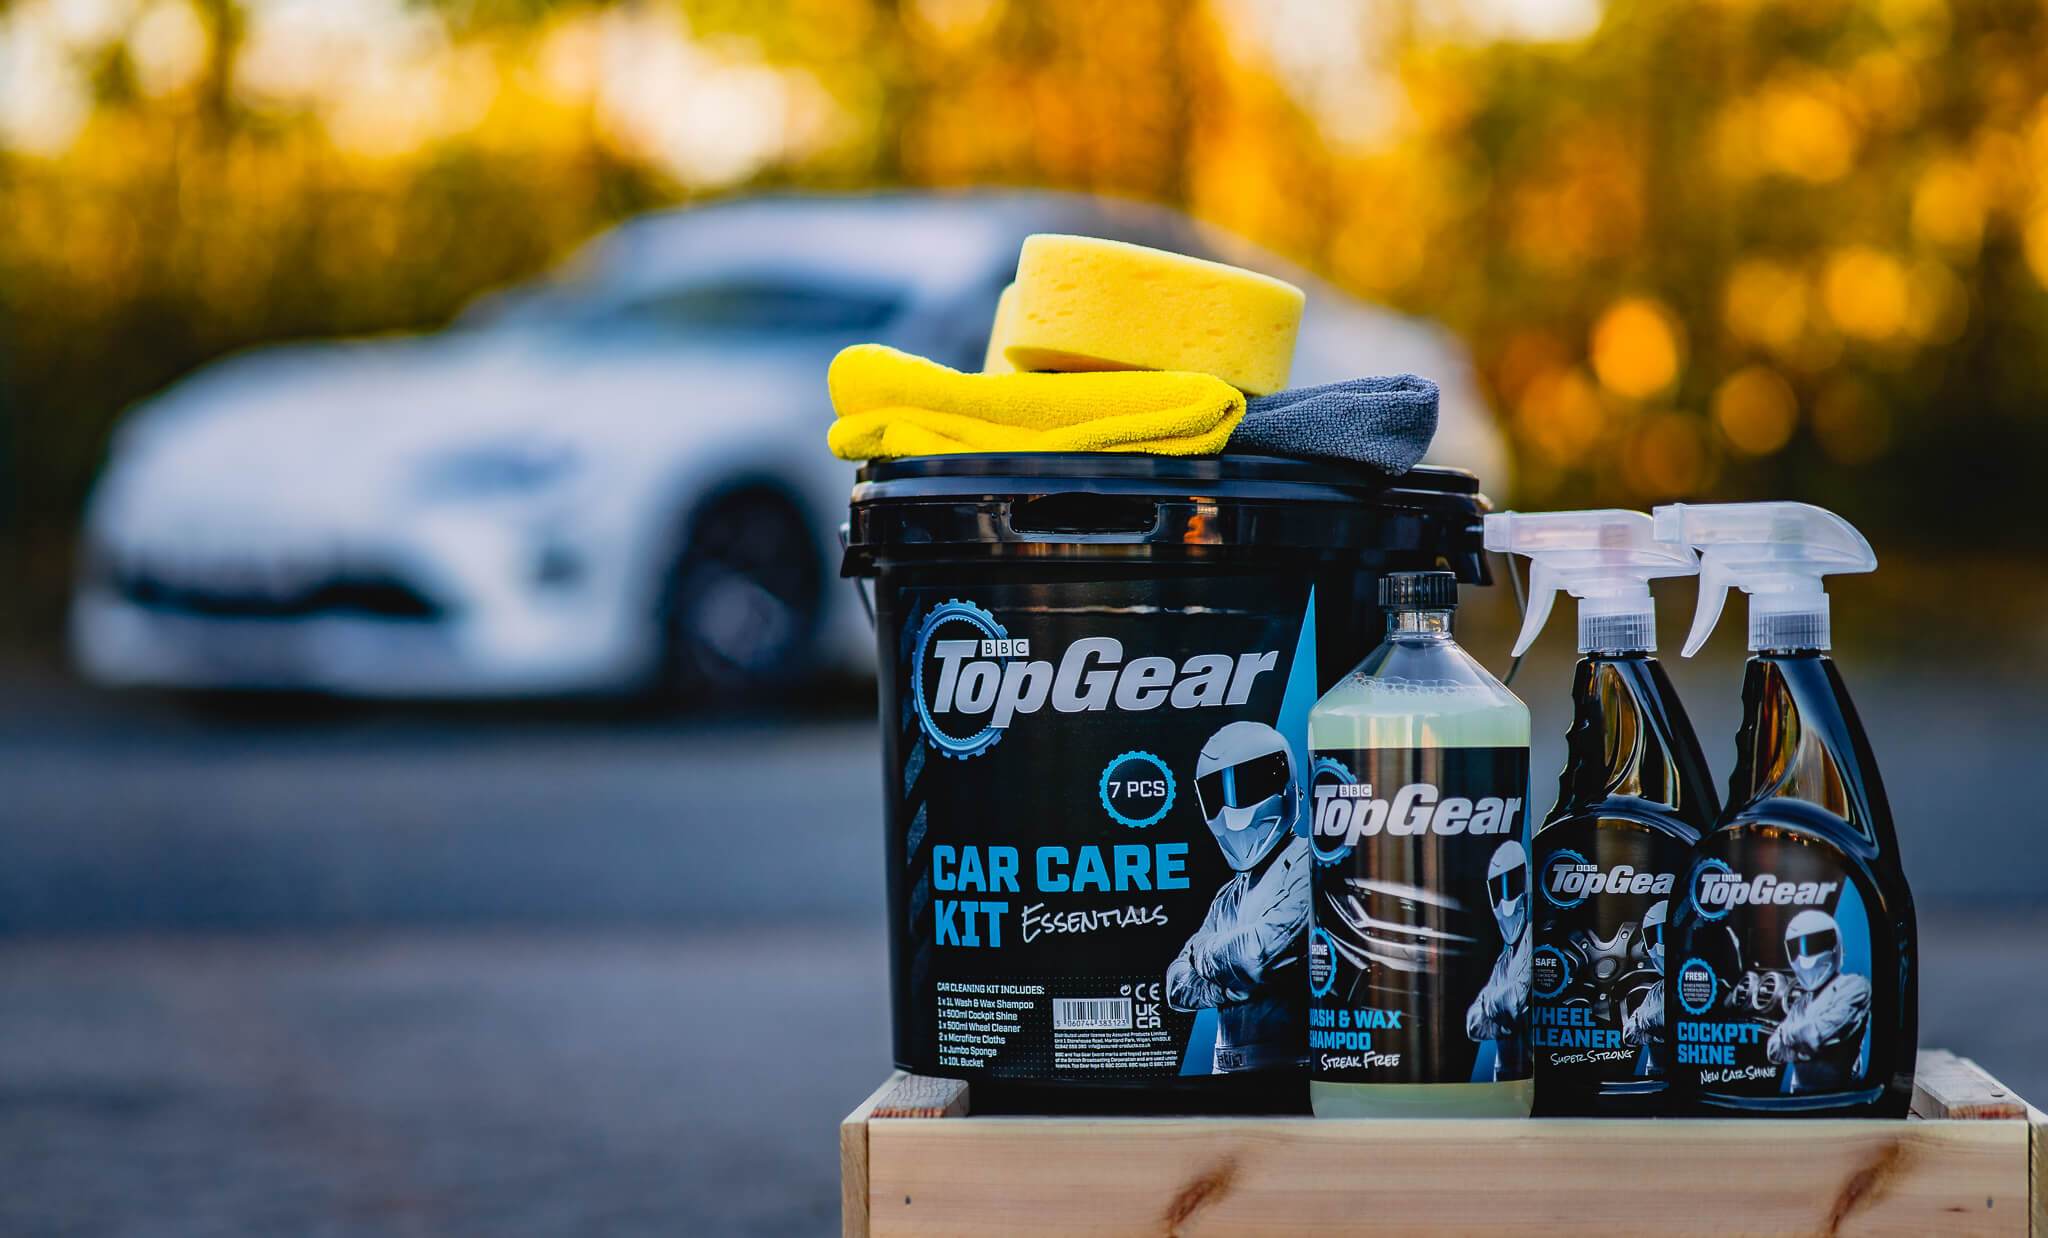 Car Wash Kit Review: The Best Products for a Spotless Shine